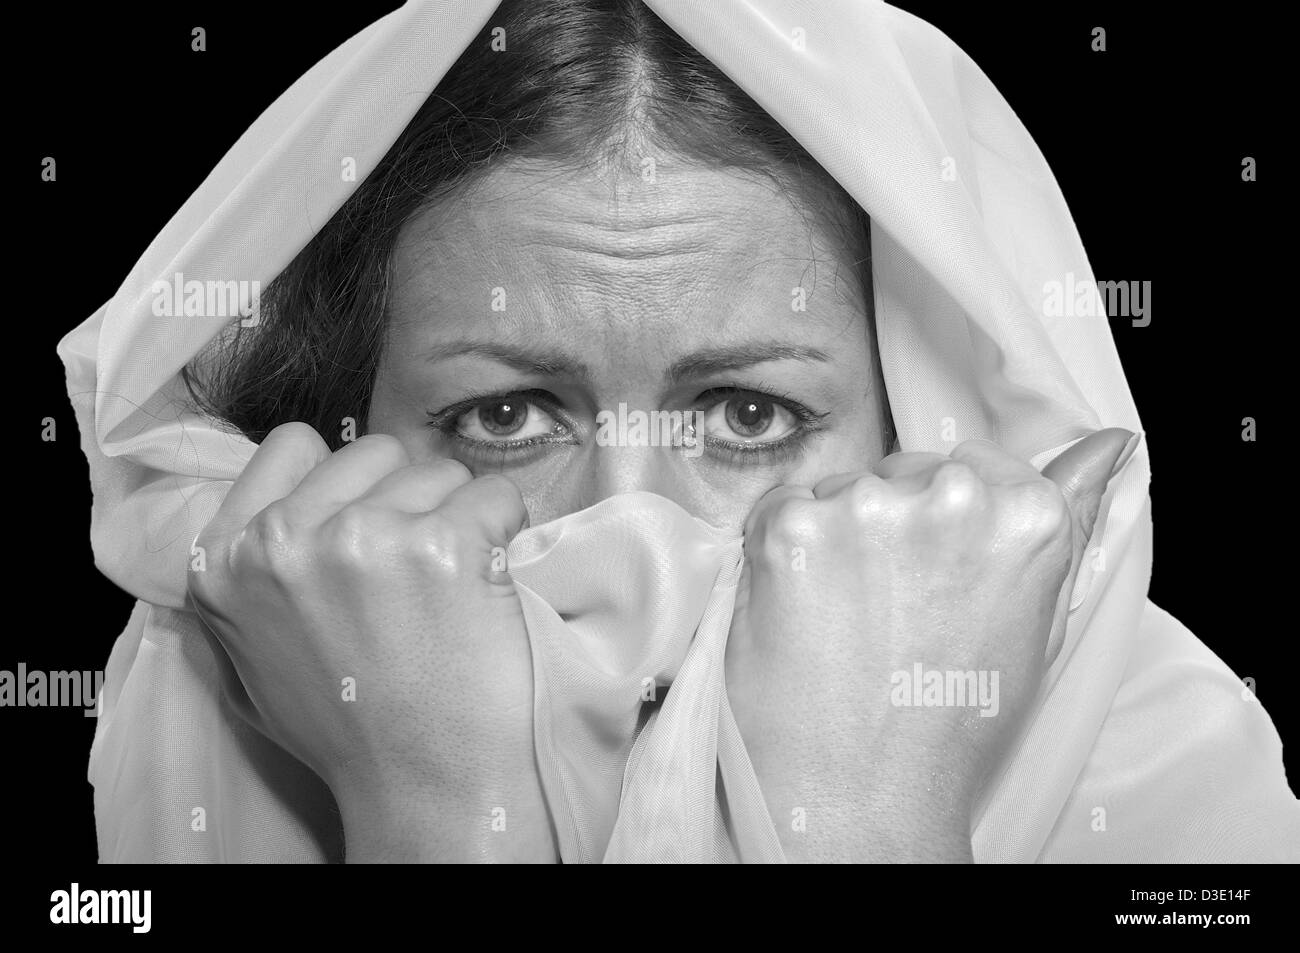 scared girl in white hijab isolated on black background, monochrome image Stock Photo